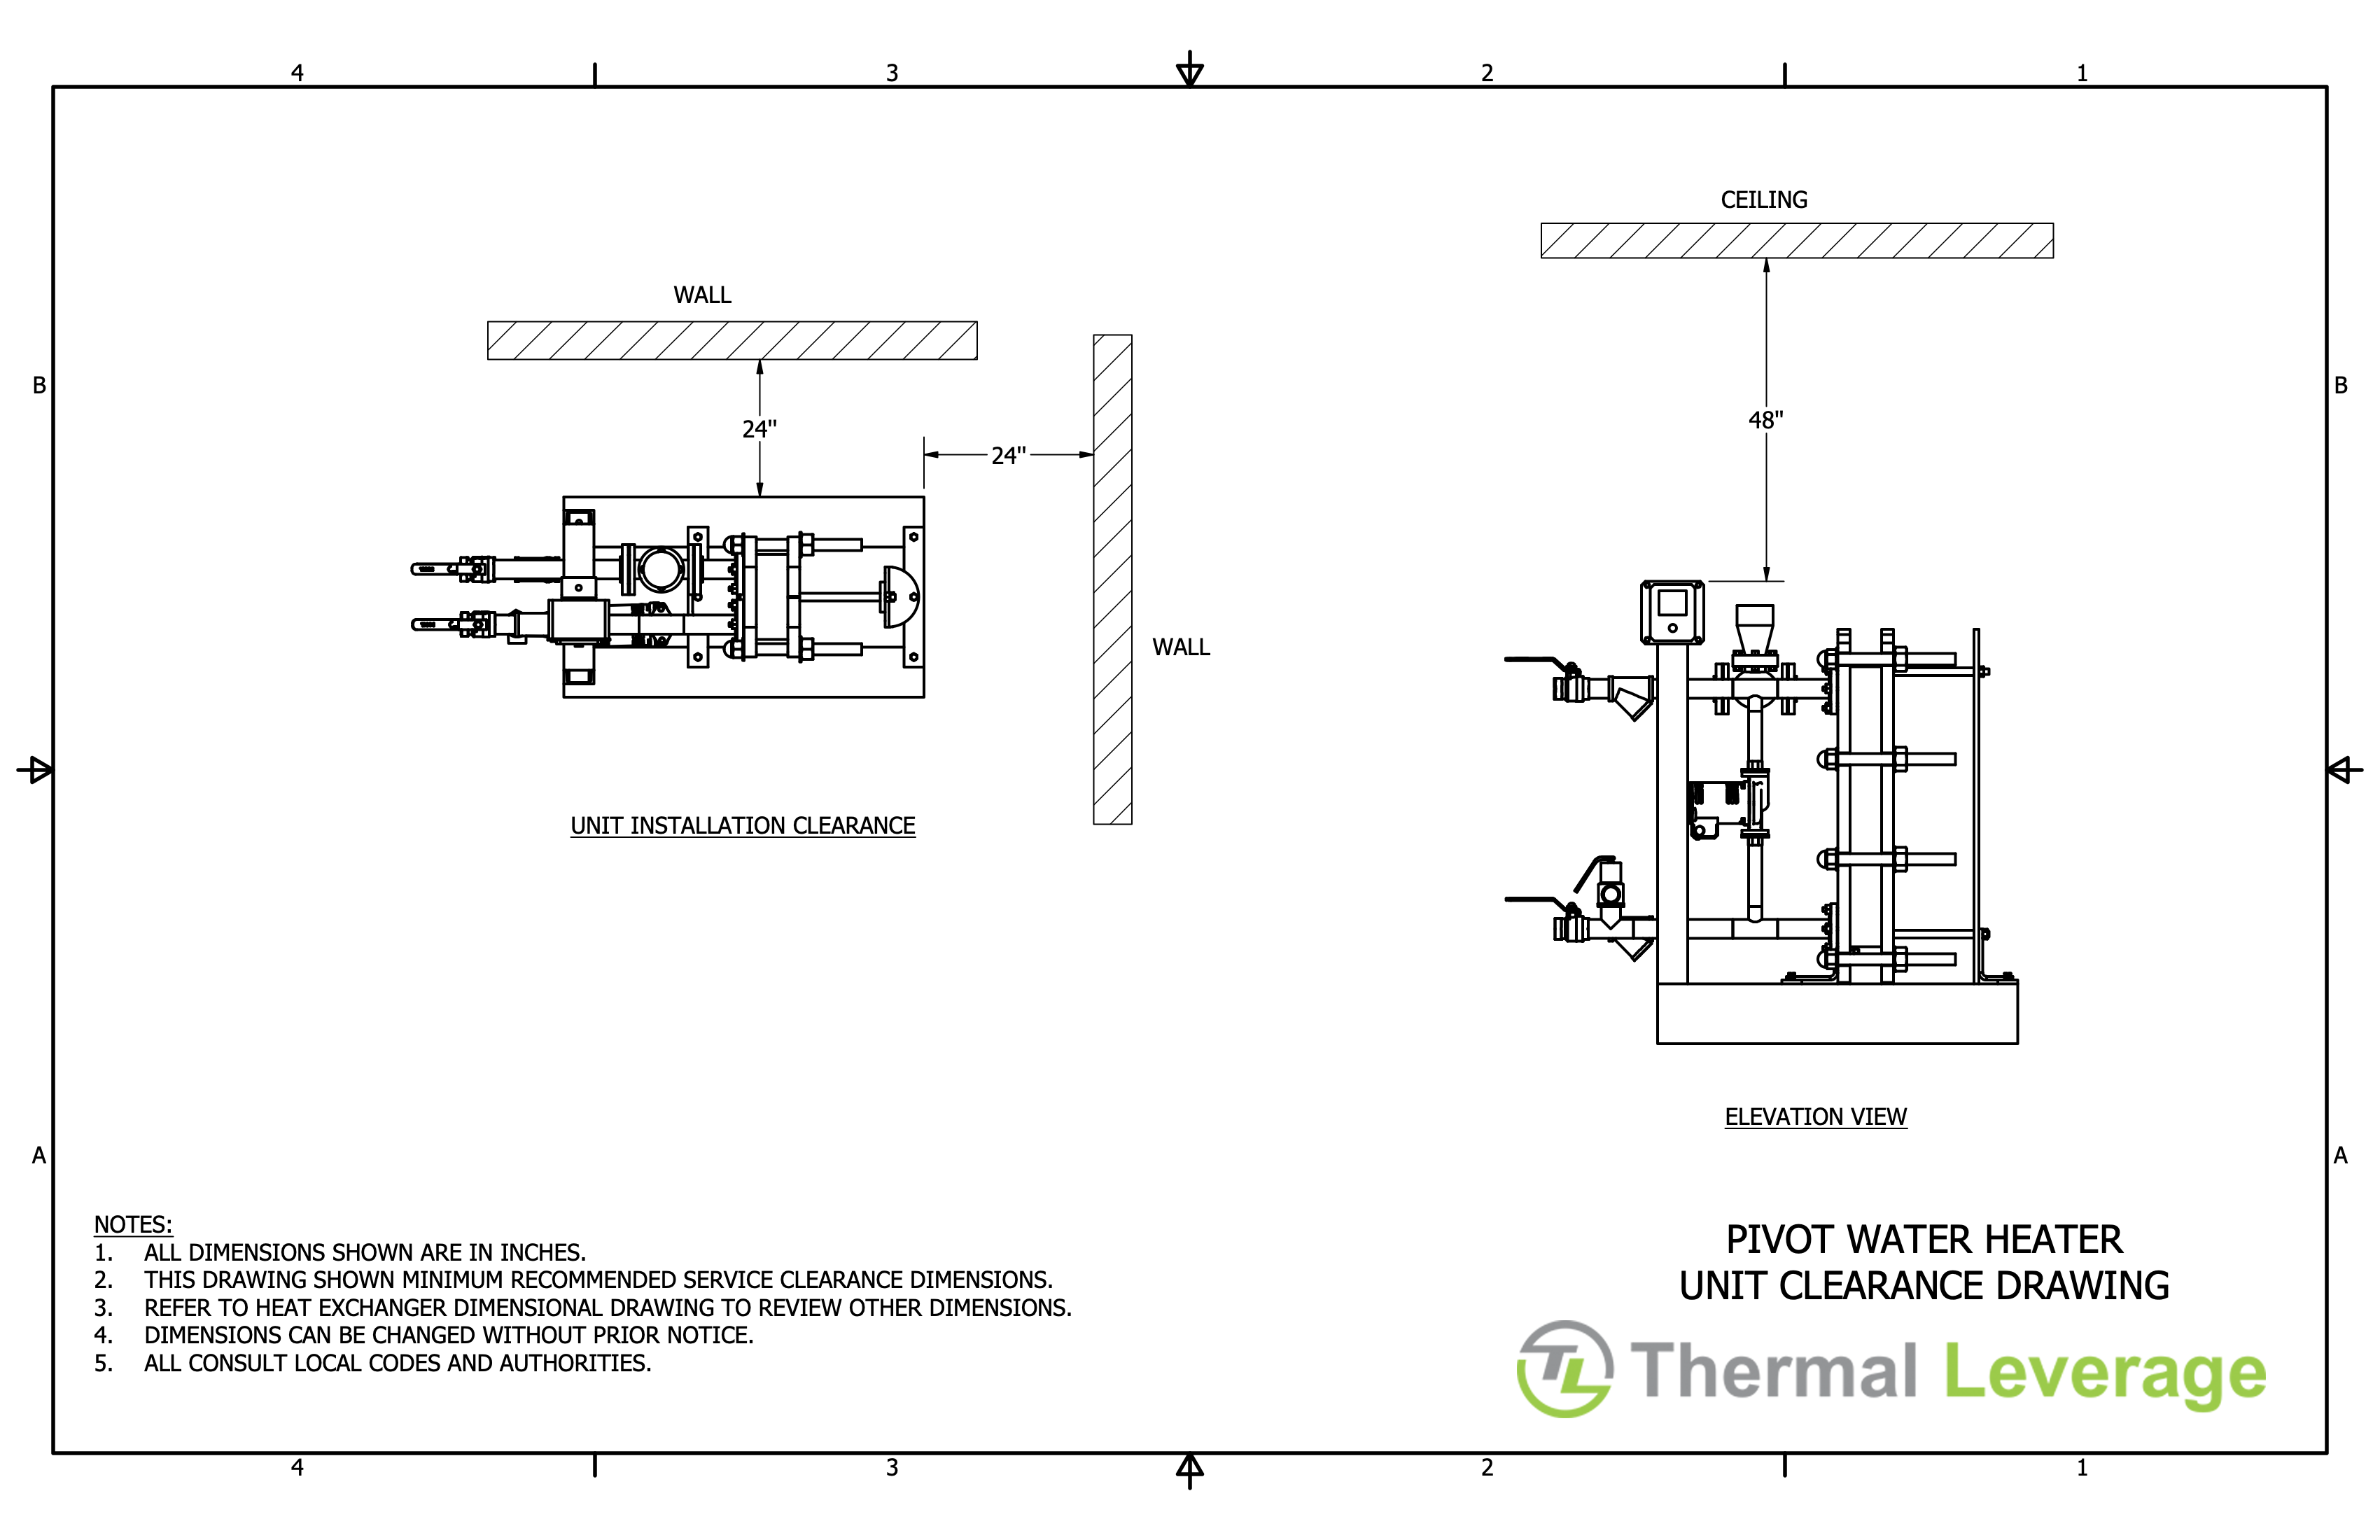 PIVOT-WATER-HEATER-UNIT-CLEARANCE-DRAWING.png